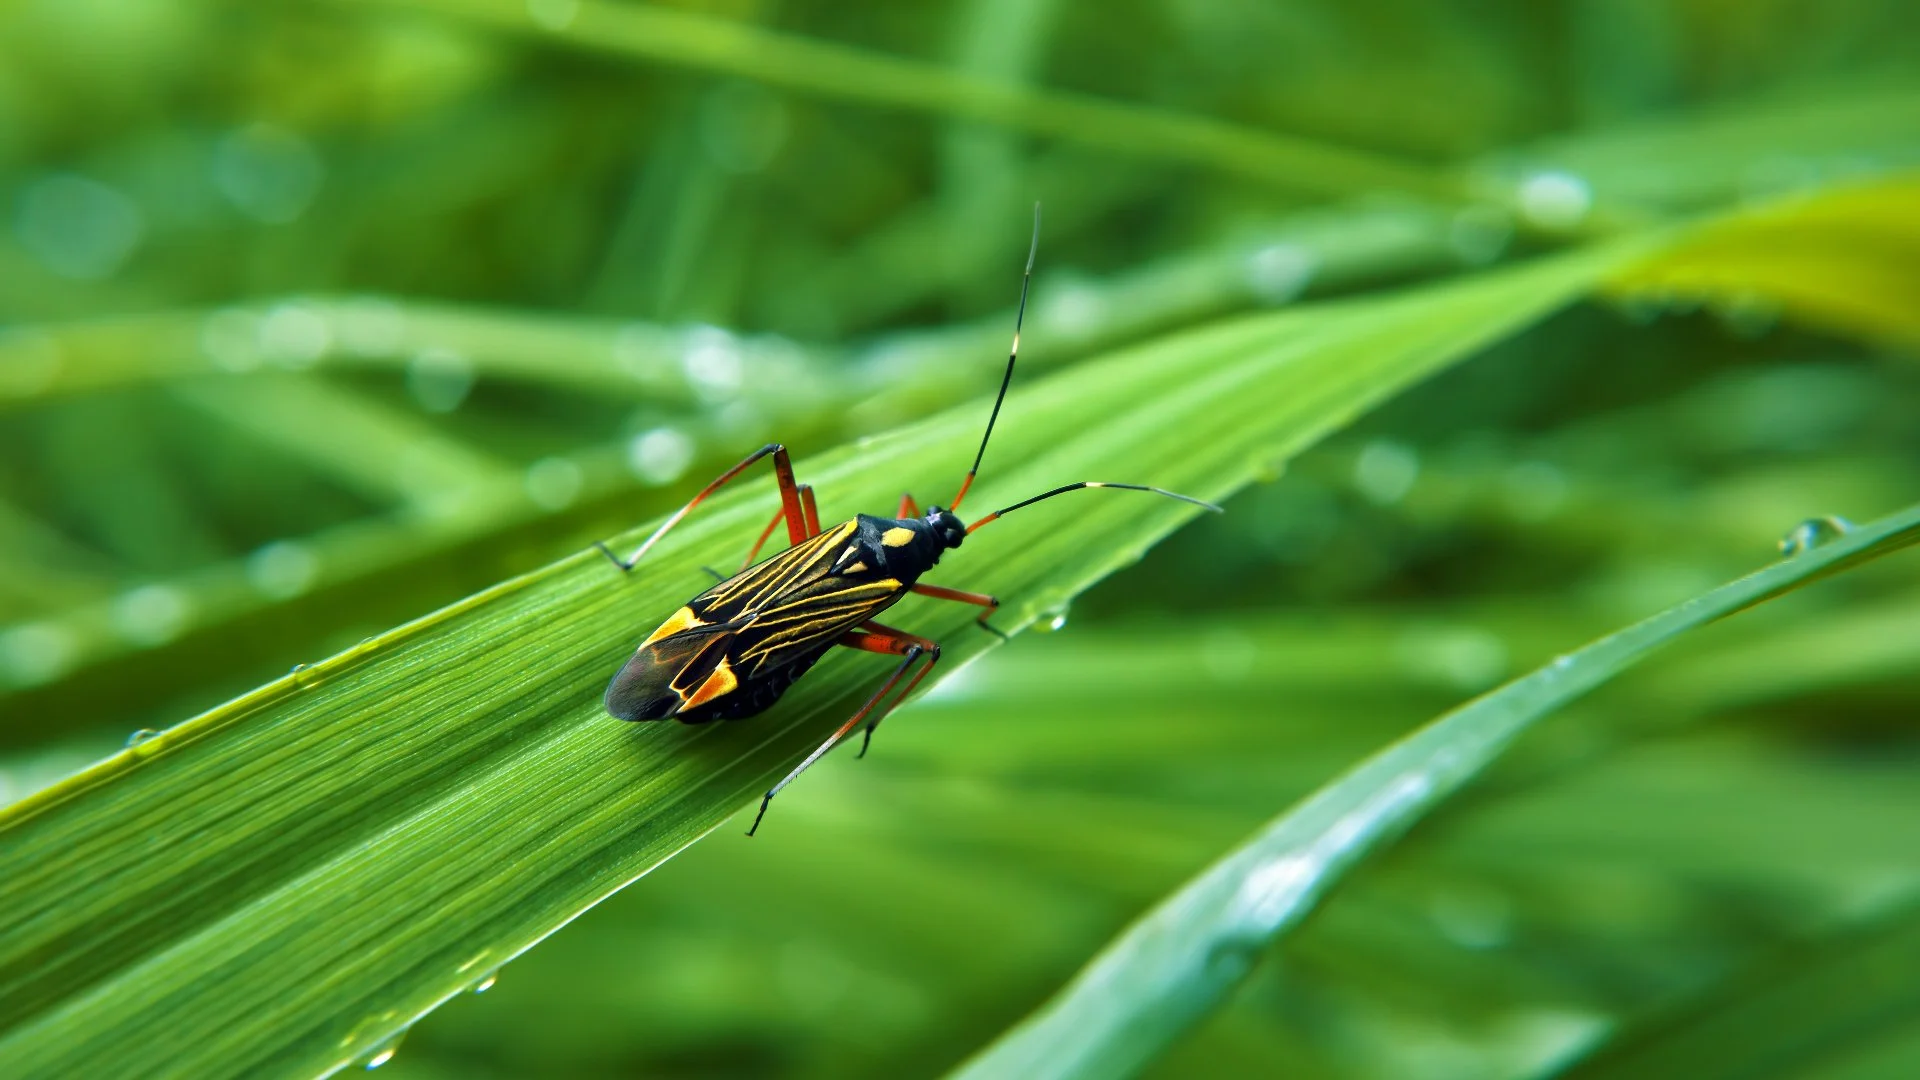 Chinch Bugs vs Bermudagrass Mites - Which Insect Is Damaging Your Lawn?